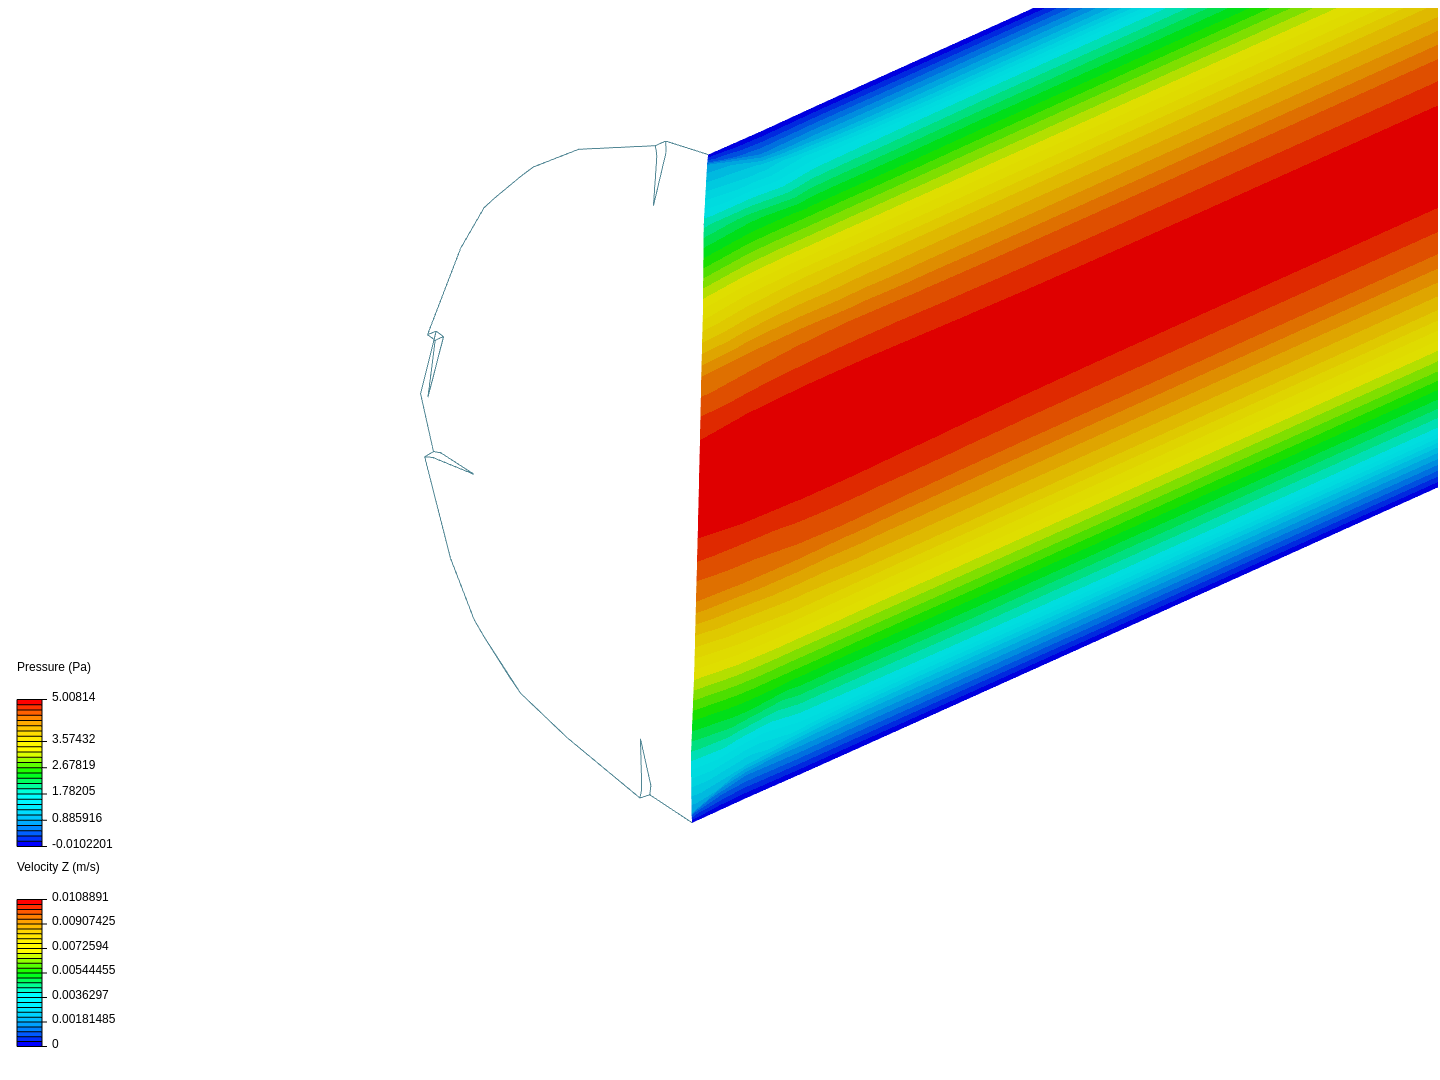 Laminar Flow in a Pipe image